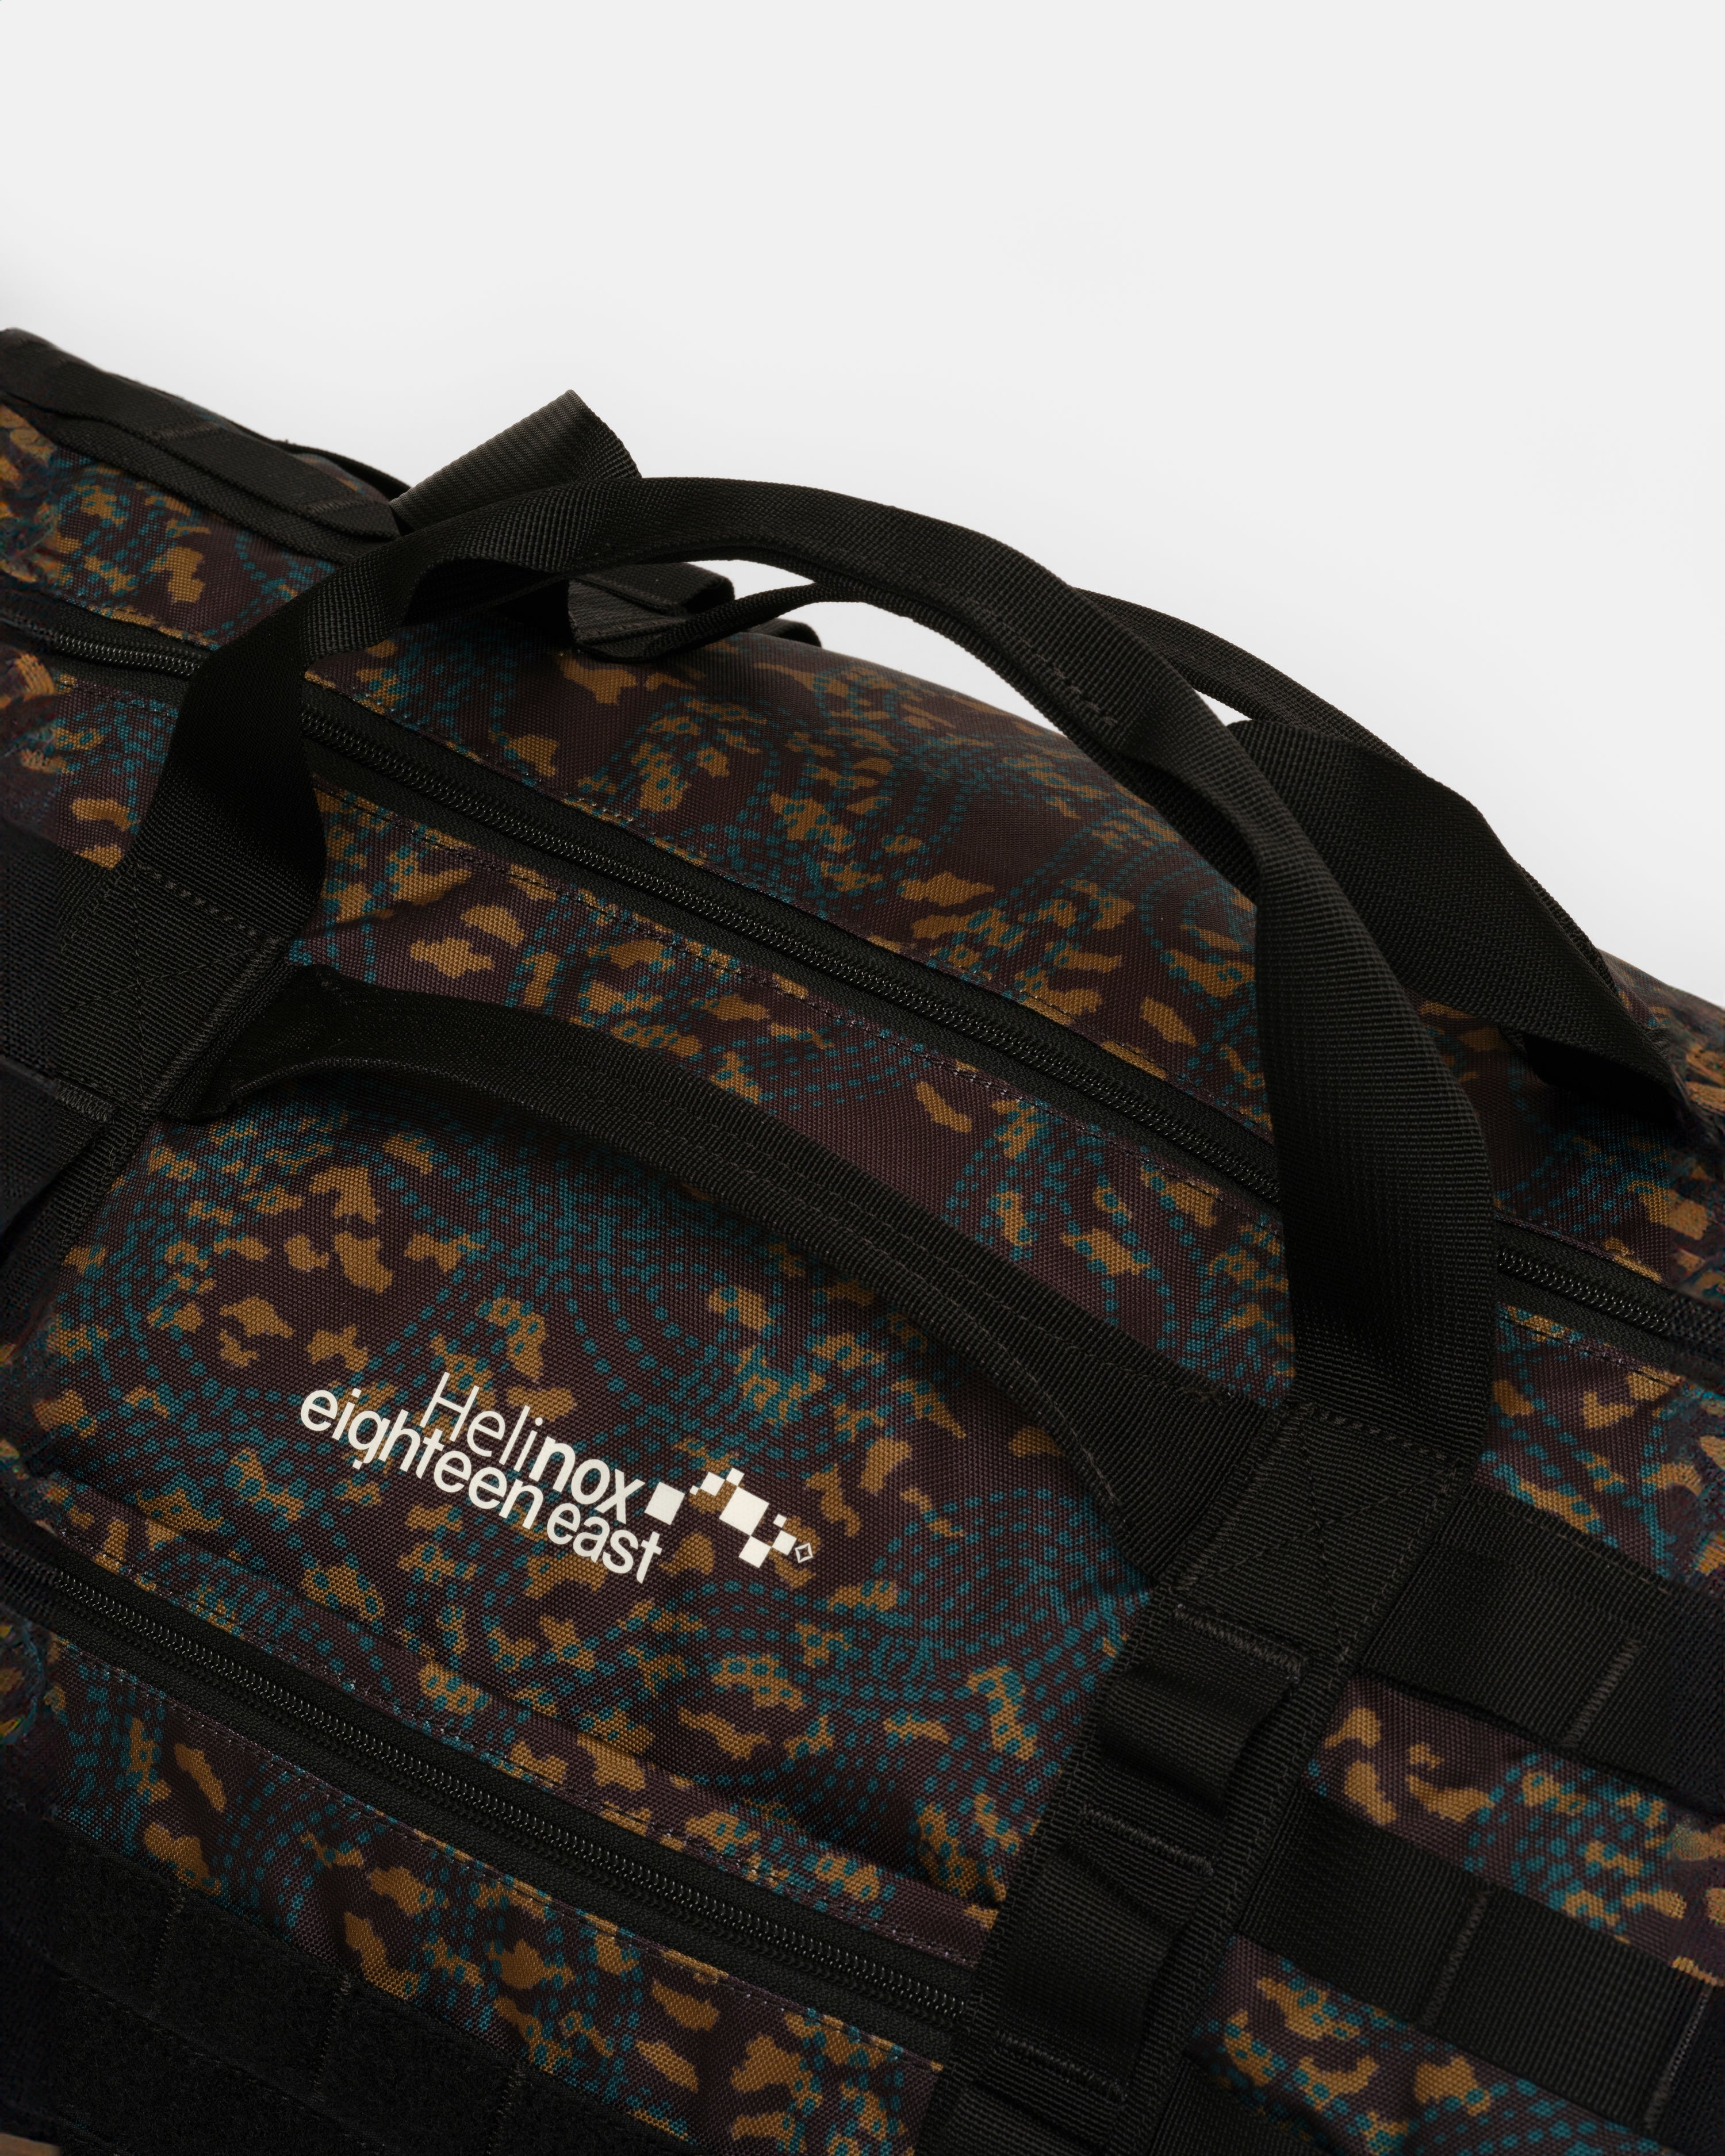 HELINOX TACTICAL FIELD DUFFLE BAG 60L - OBSIDIAN "TRACKS" PRINTED 600D RECYCLED POLYESTER CANVAS